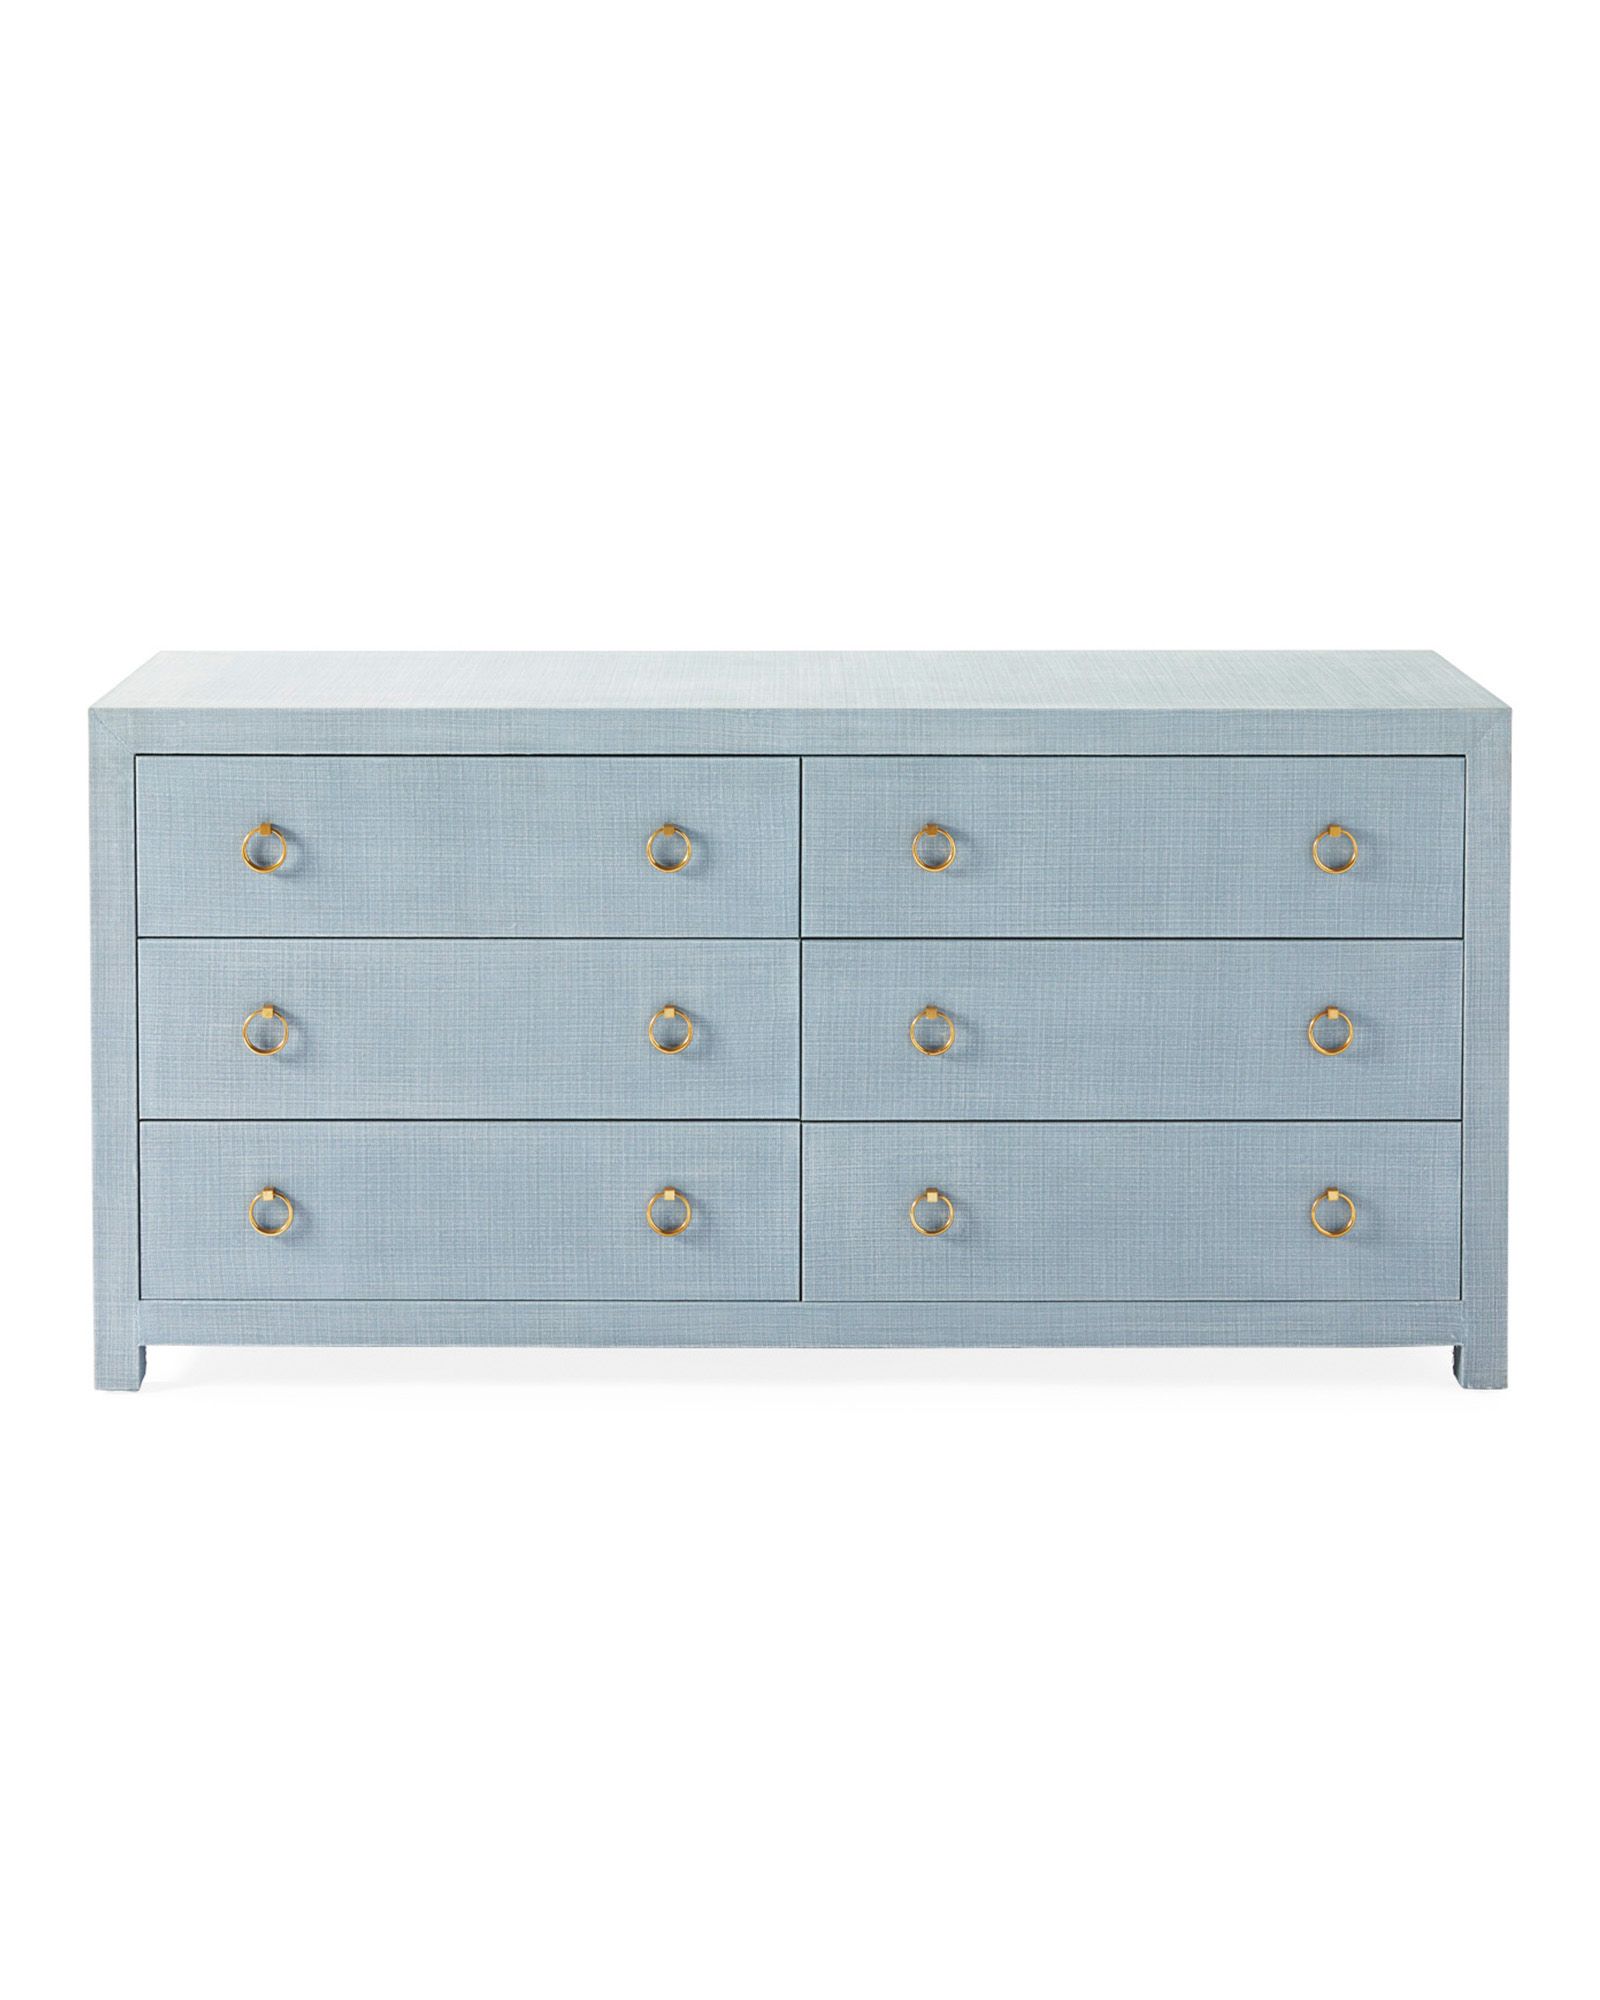 Driftway Wide Dresser | Serena and Lily